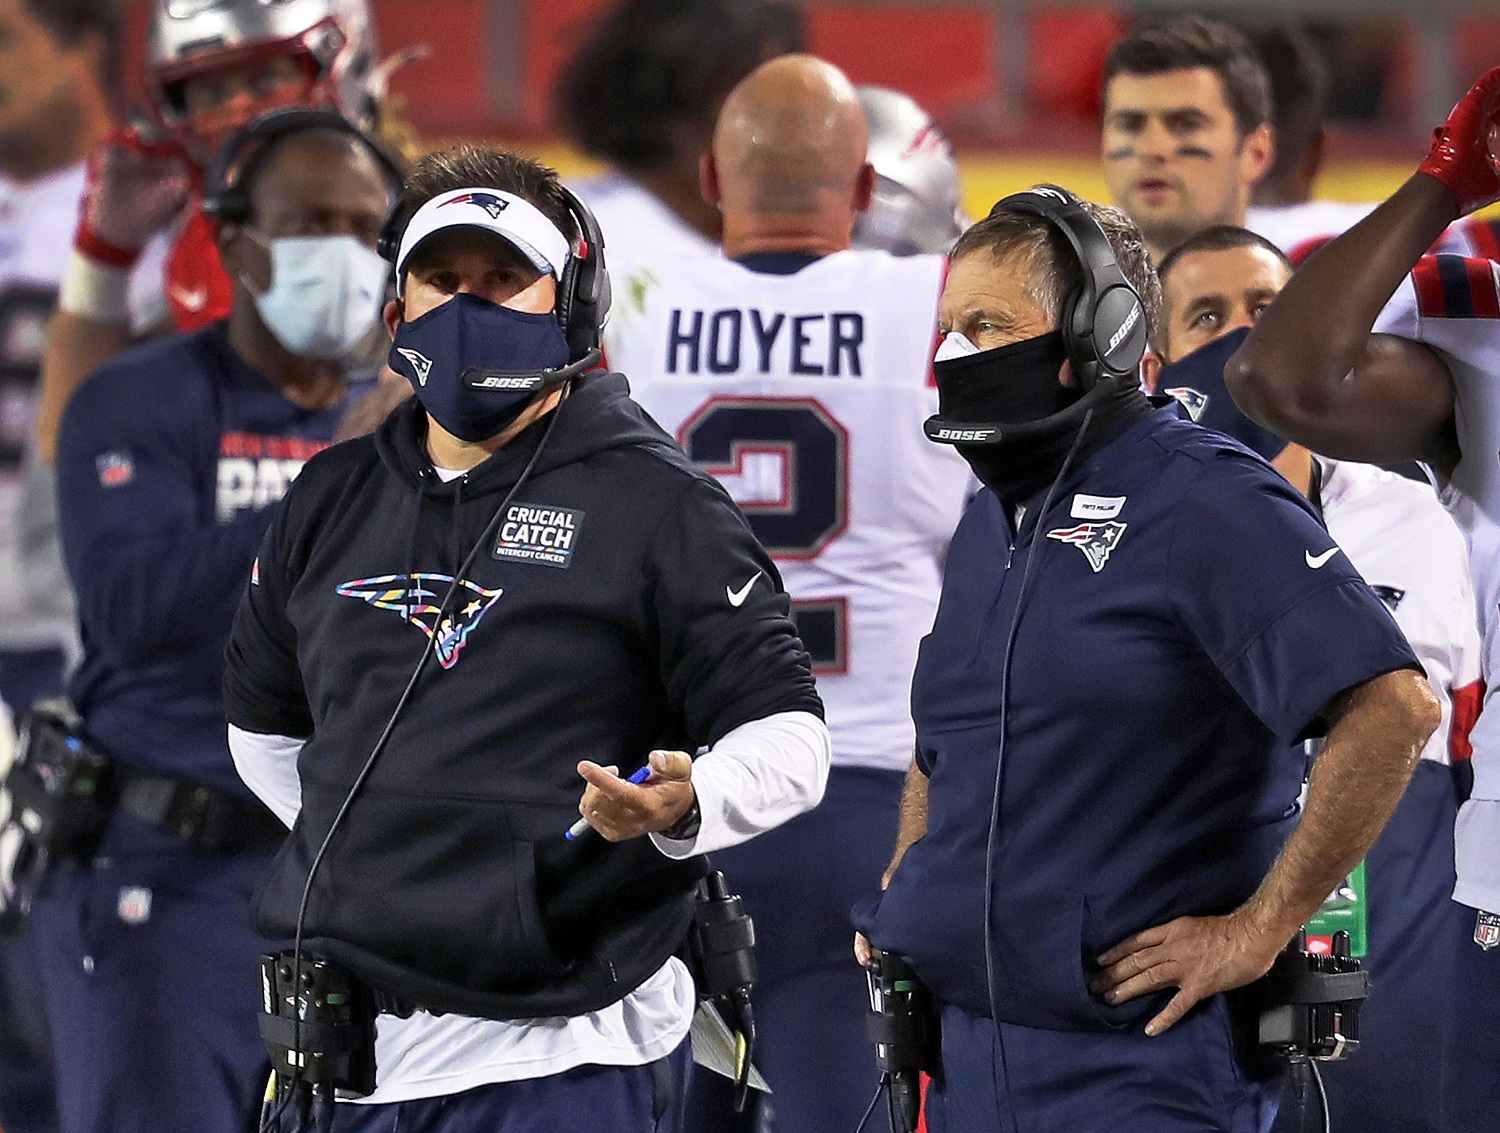 The New England Patriots just passed an important COVID-19 test ahead of their matchup with the Denver Broncos.